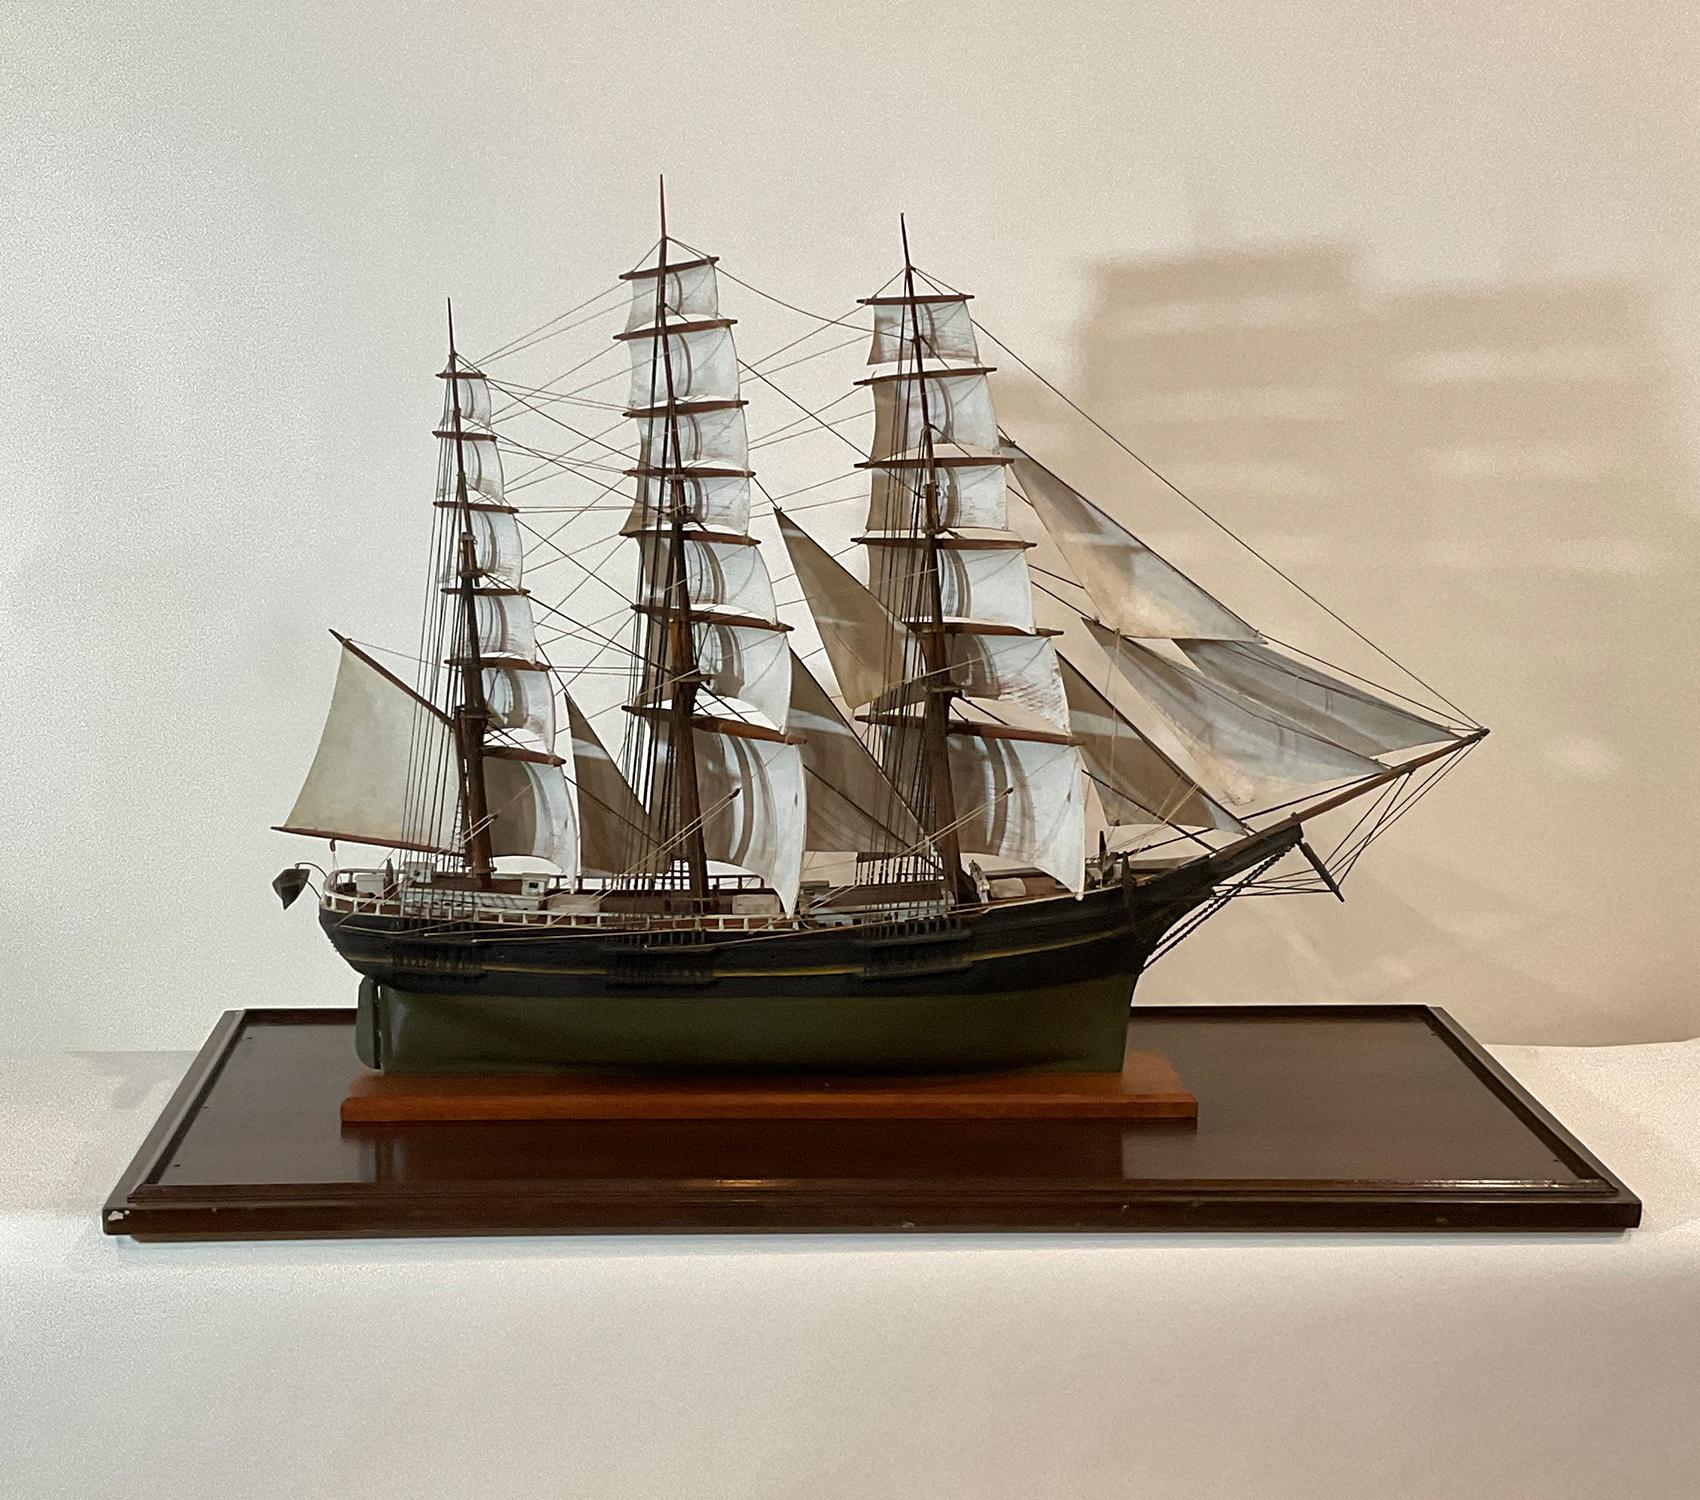 Carved wood sails set at a graceful angle on the three masts. Details include surrounding railing, cabins, hatches, capstan, anchors, chain, scribed deck, wheel, etc. Set into a case with old glass and museum inventory number.

Weight: 76